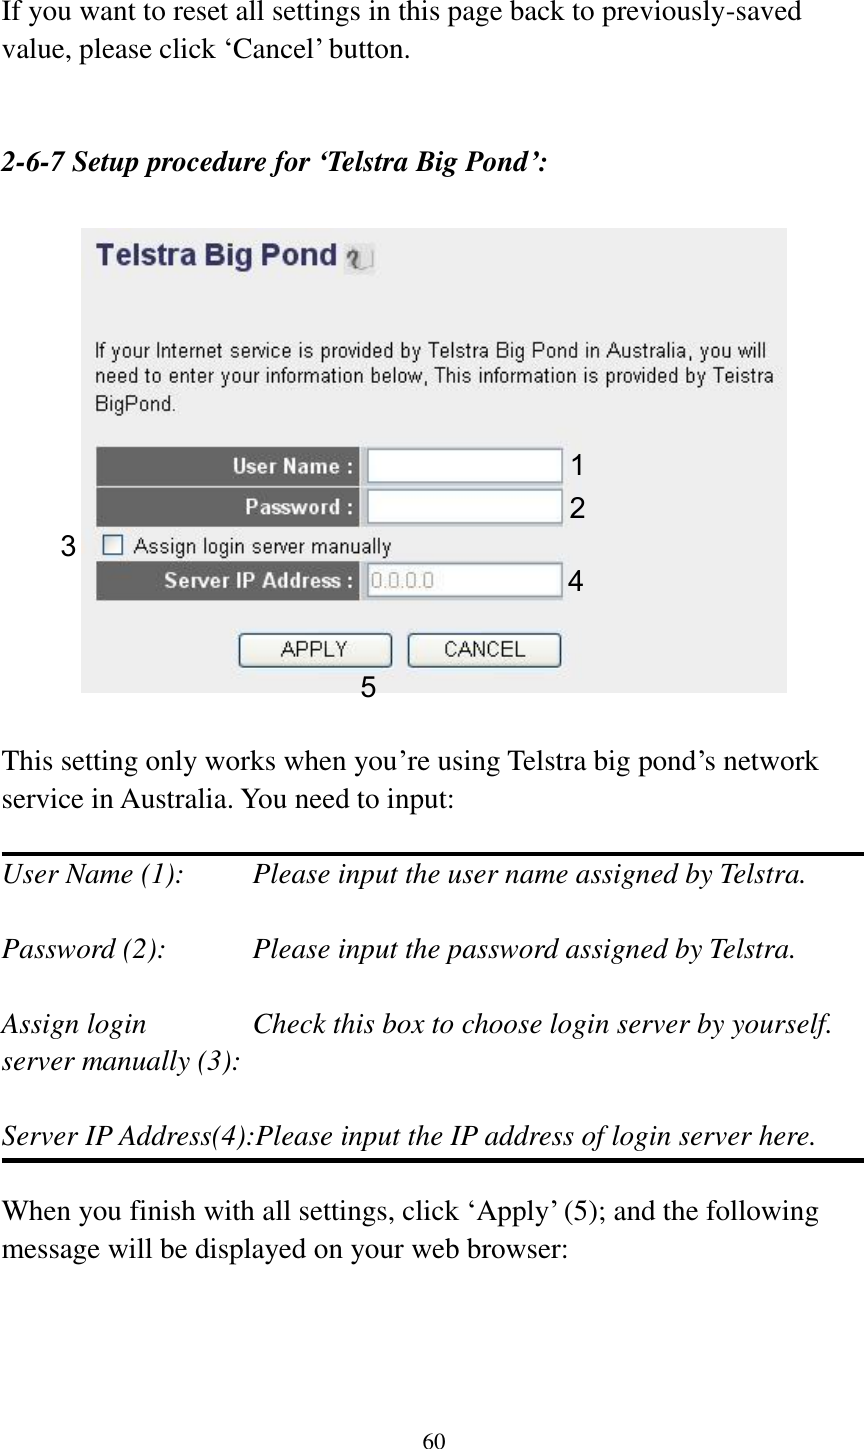 60  If you want to reset all settings in this page back to previously-saved value, please click „Cancel‟ button.   2-6-7 Setup procedure for ‘Telstra Big Pond’:    This setting only works when you‟re using Telstra big pond‟s network service in Australia. You need to input:  User Name (1):     Please input the user name assigned by Telstra.  Password (2):      Please input the password assigned by Telstra.  Assign login      Check this box to choose login server by yourself. server manually (3):    Server IP Address(4):Please input the IP address of login server here.  When you finish with all settings, click „Apply‟ (5); and the following message will be displayed on your web browser:  1 2 3 4 5 